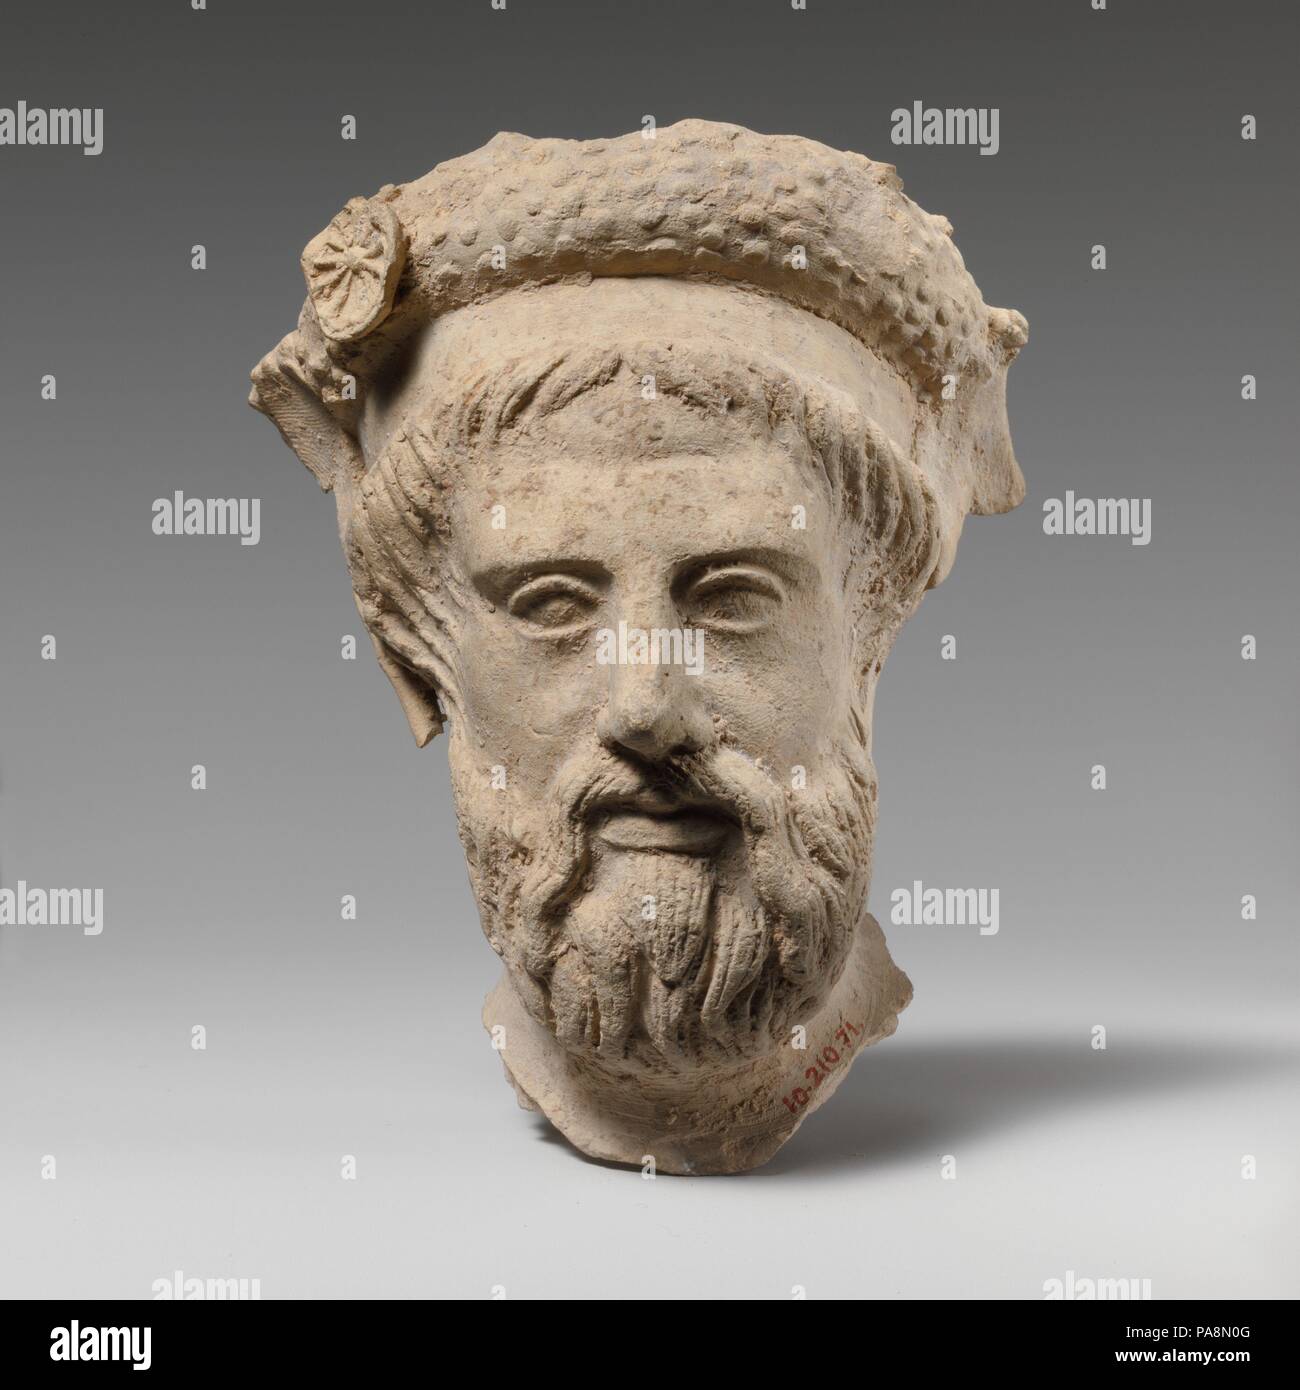 Terracotta head of a bearded man. Culture: Greek, South Italian, Tarentine. Dimensions: H. 4 3/4 in. (12.1 cm). Date: early 4th century B.C..  The head is certainly part of a representation of a reclining figure, whose identity is unclear. He wears a flat band around his forehead and, above it, a thicker one, embellished with rosettes. Museum: Metropolitan Museum of Art, New York, USA. Stock Photo